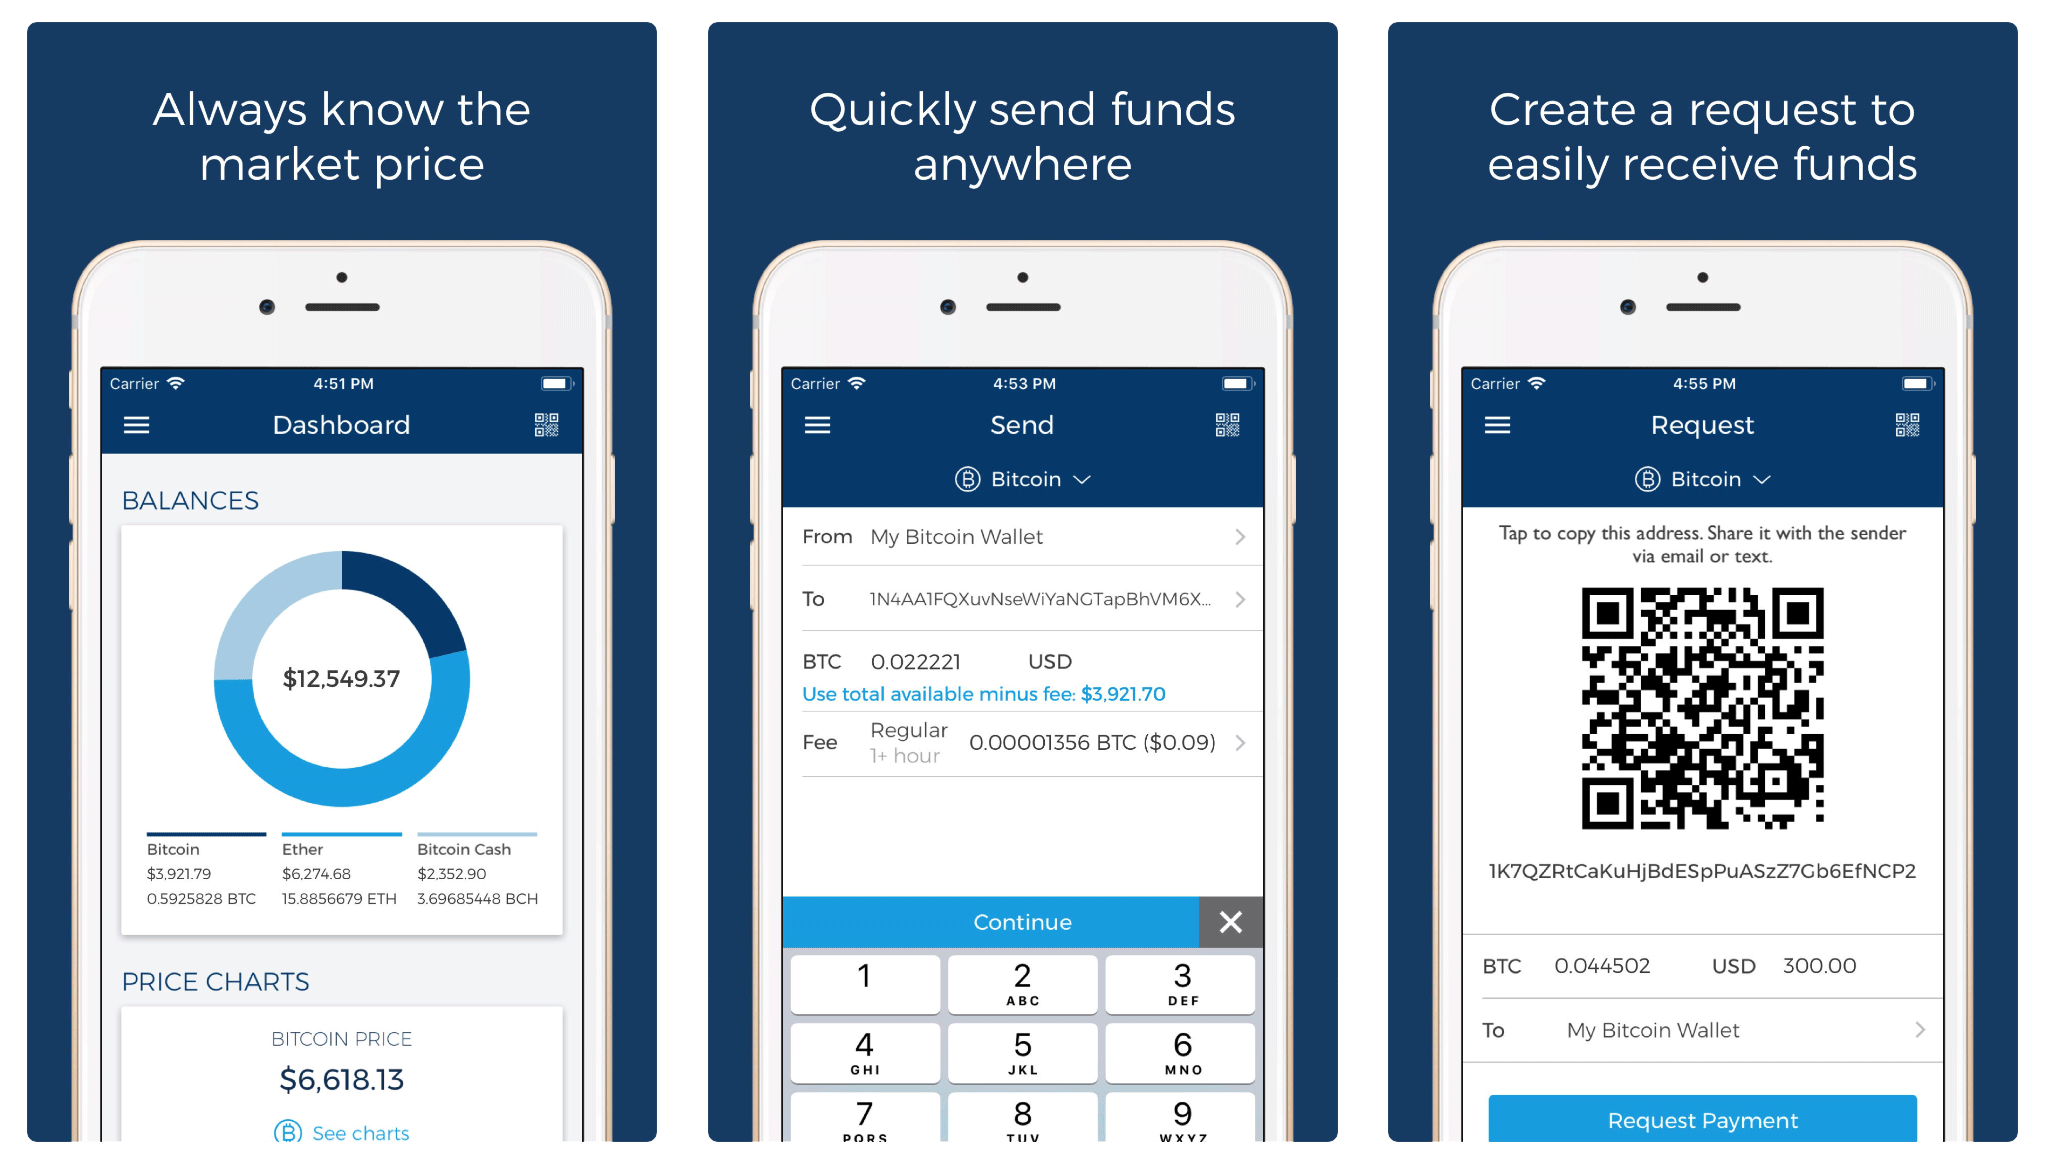 Cryptocurrency App Blockchain Wallet. The first image shows the price chart and balance for your digital assets. The second shows a transfer, and the third is a QR code for receiving funds.